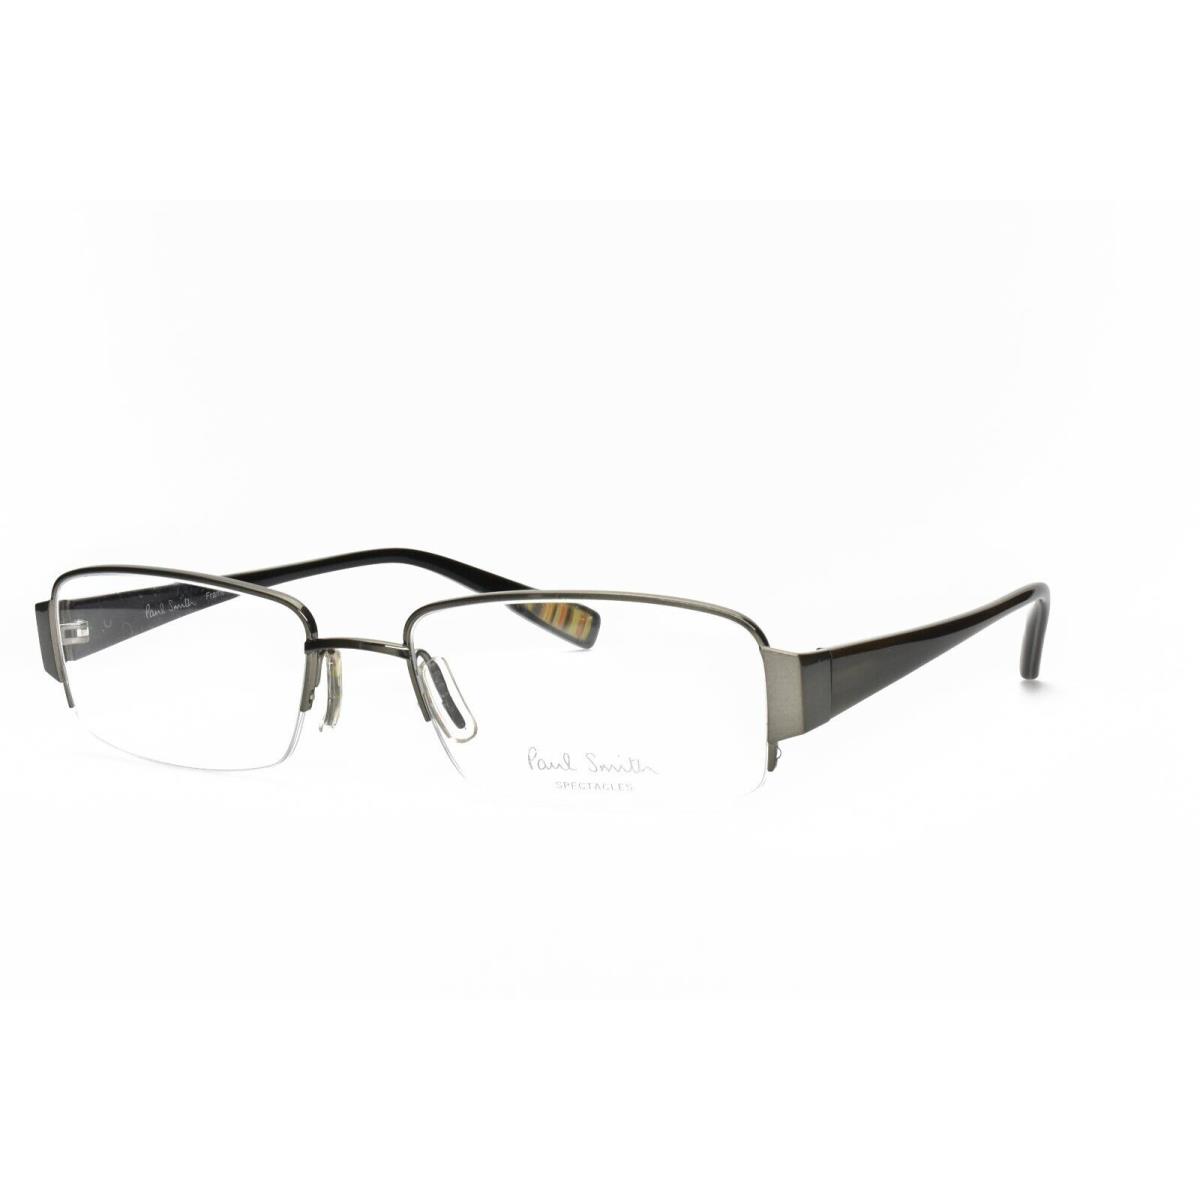 Paul Smith PS 1001 A Eyeglasses Frames Only 54-18-145